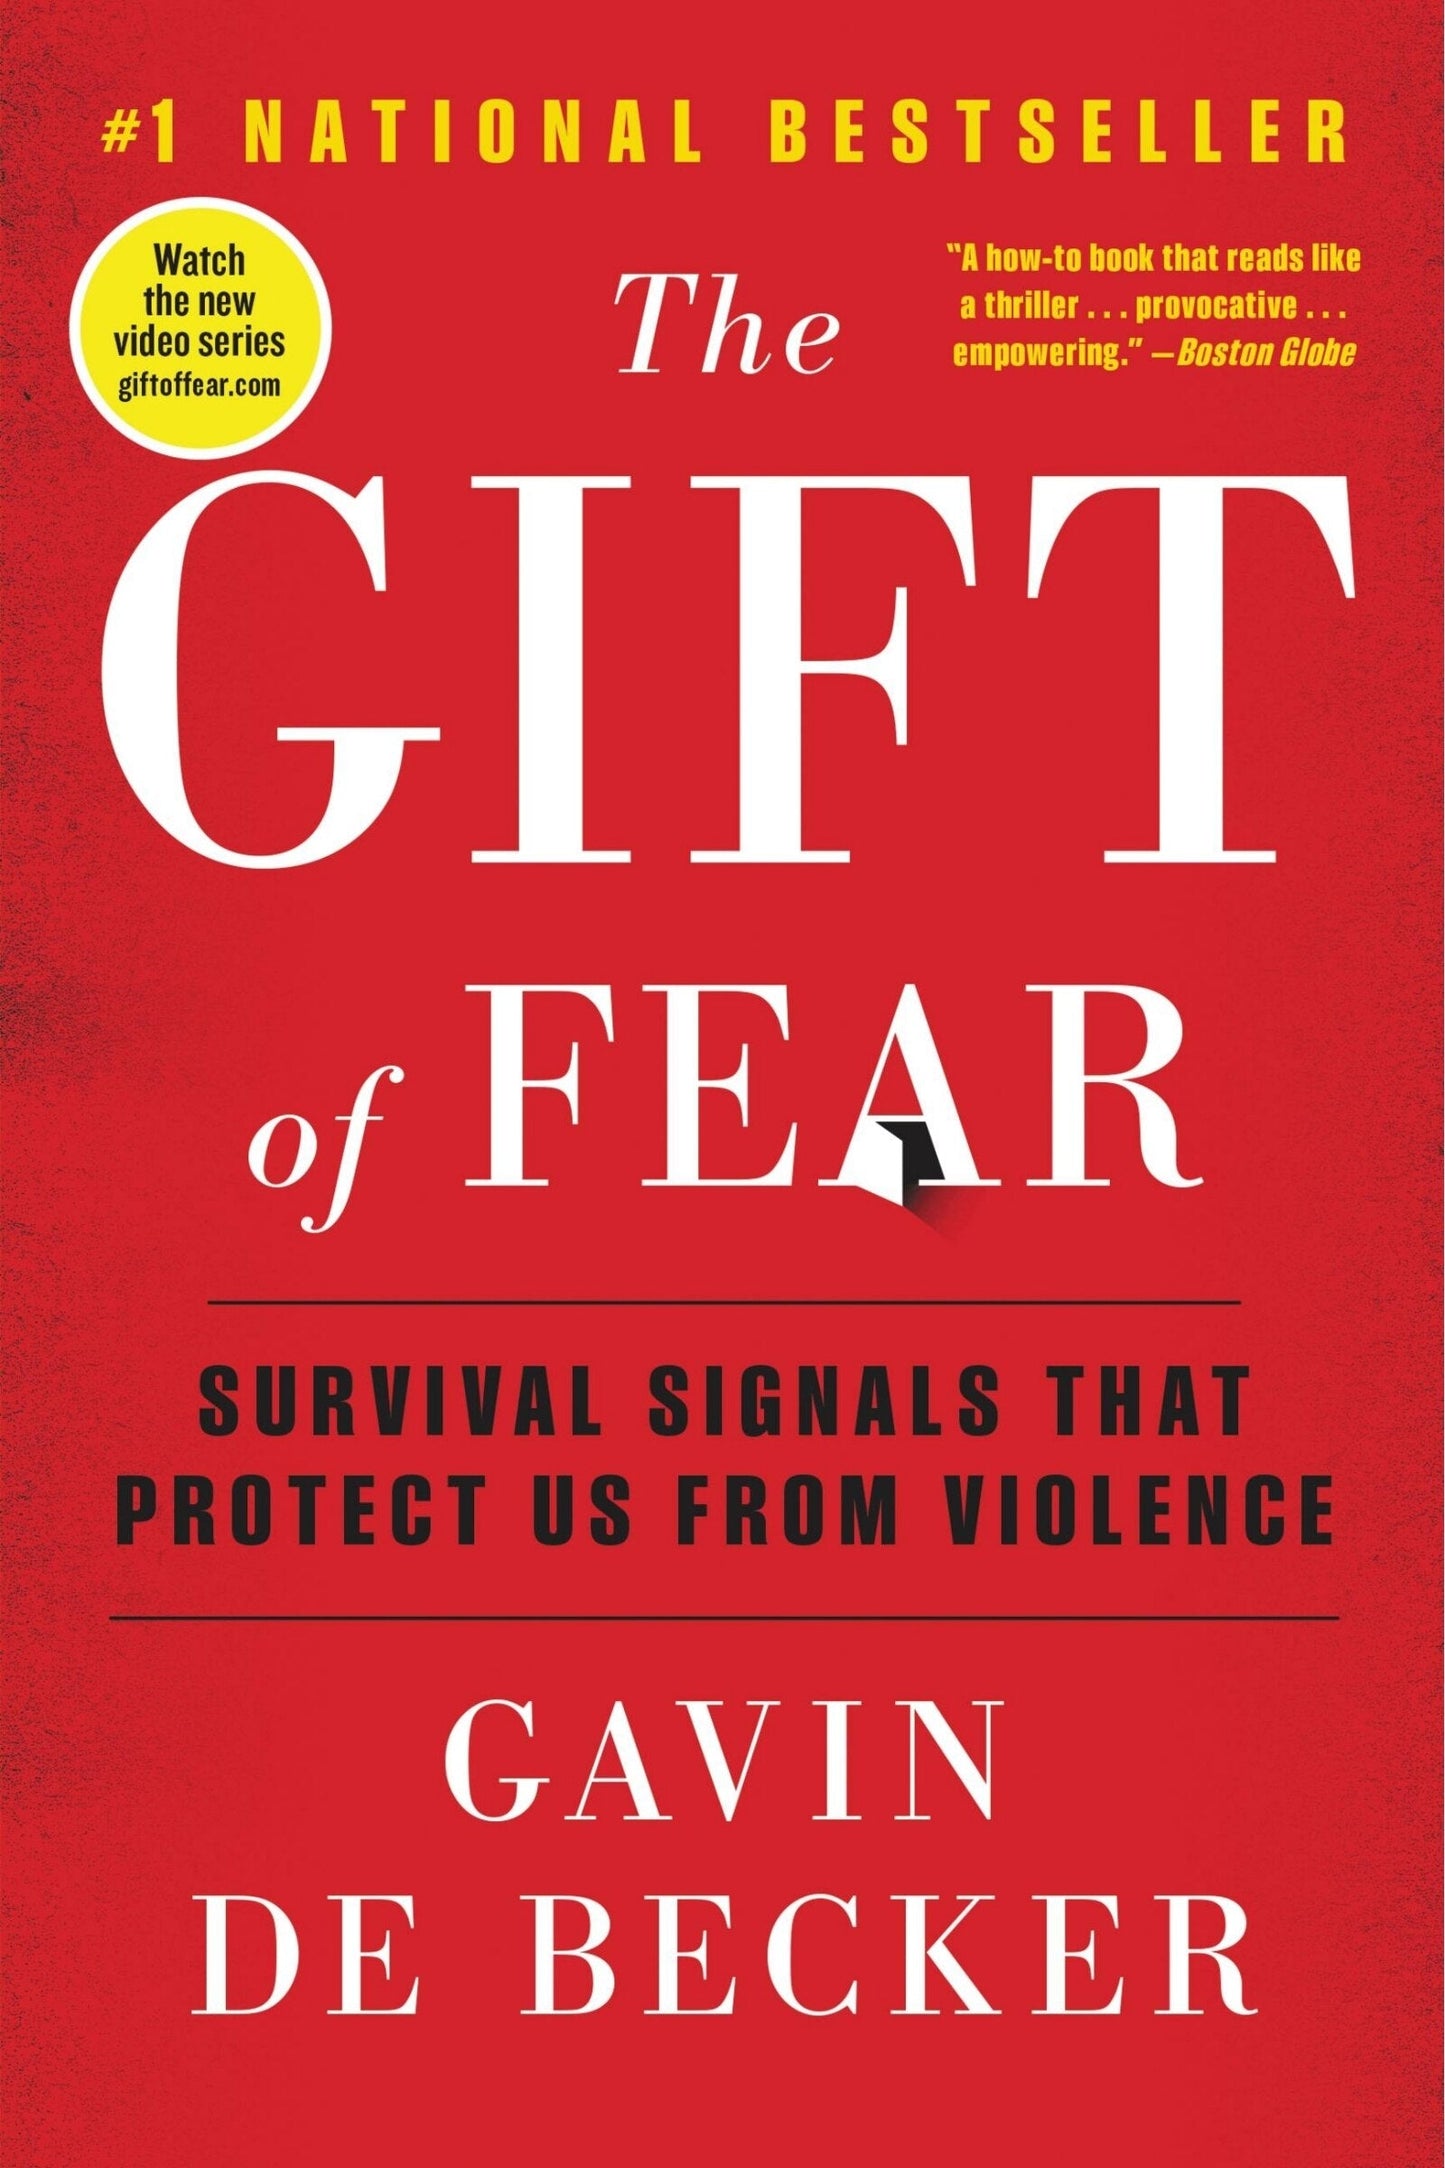 The Gift of Fear: Survival Signals That Protect Us from Violence - de Becker, Gavin (Paperback)-Self-Help-9780316235778-BookBizCanada